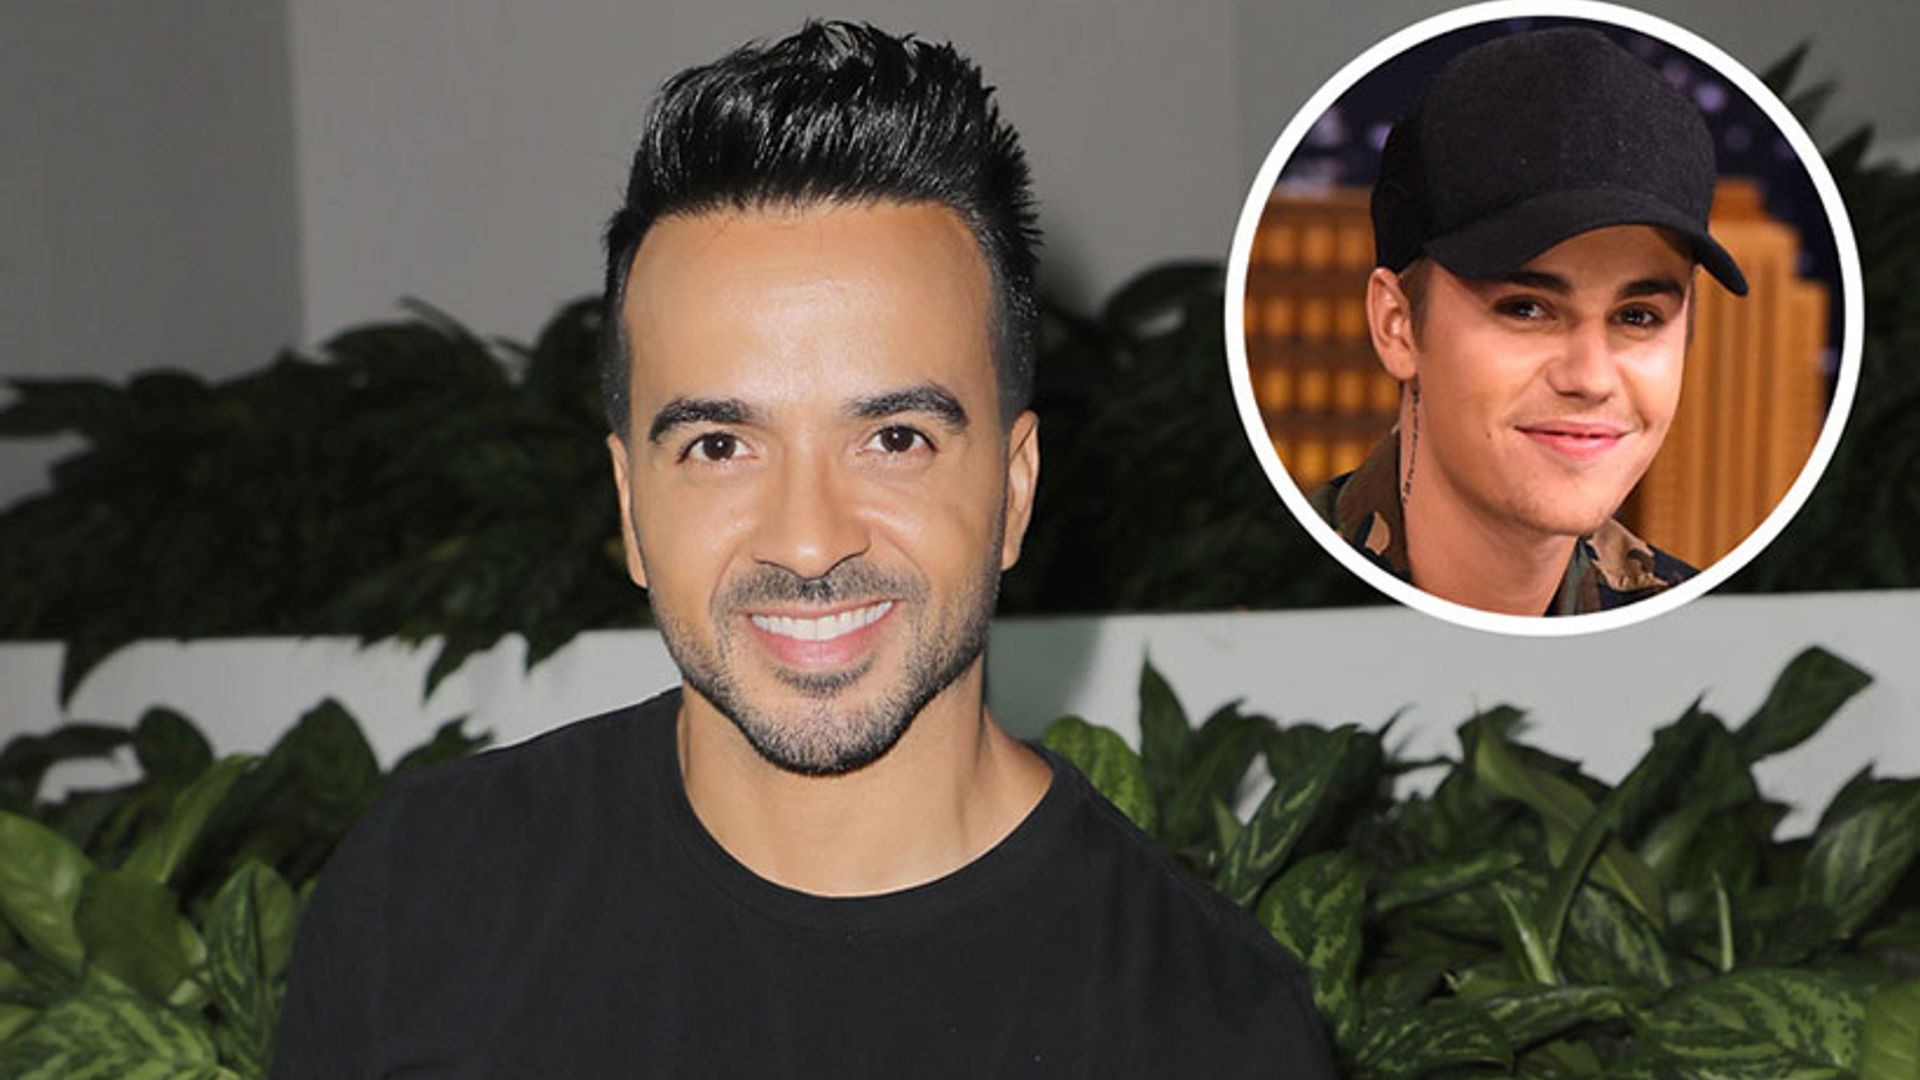 Luis Fonsi on 'Despacito' being the song of the summer and working with Justin Bieber